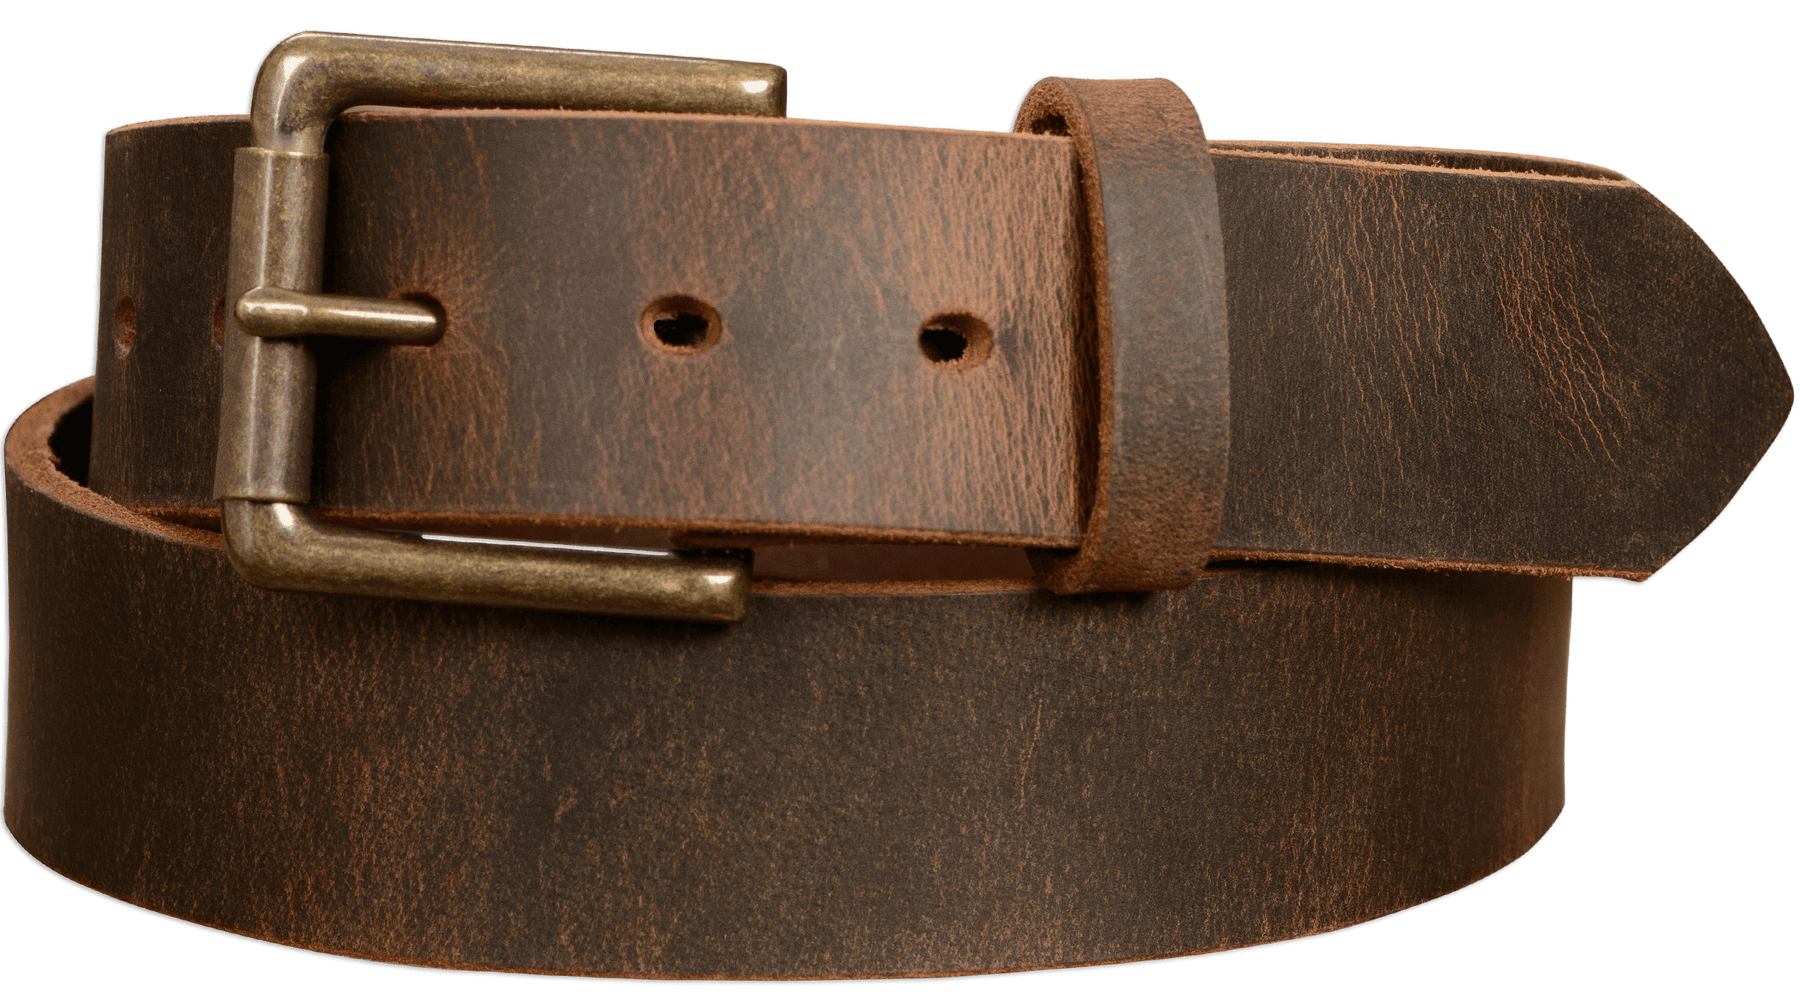 The Rustico Men's Belt  Handcrafted for Life by Isaac Childs